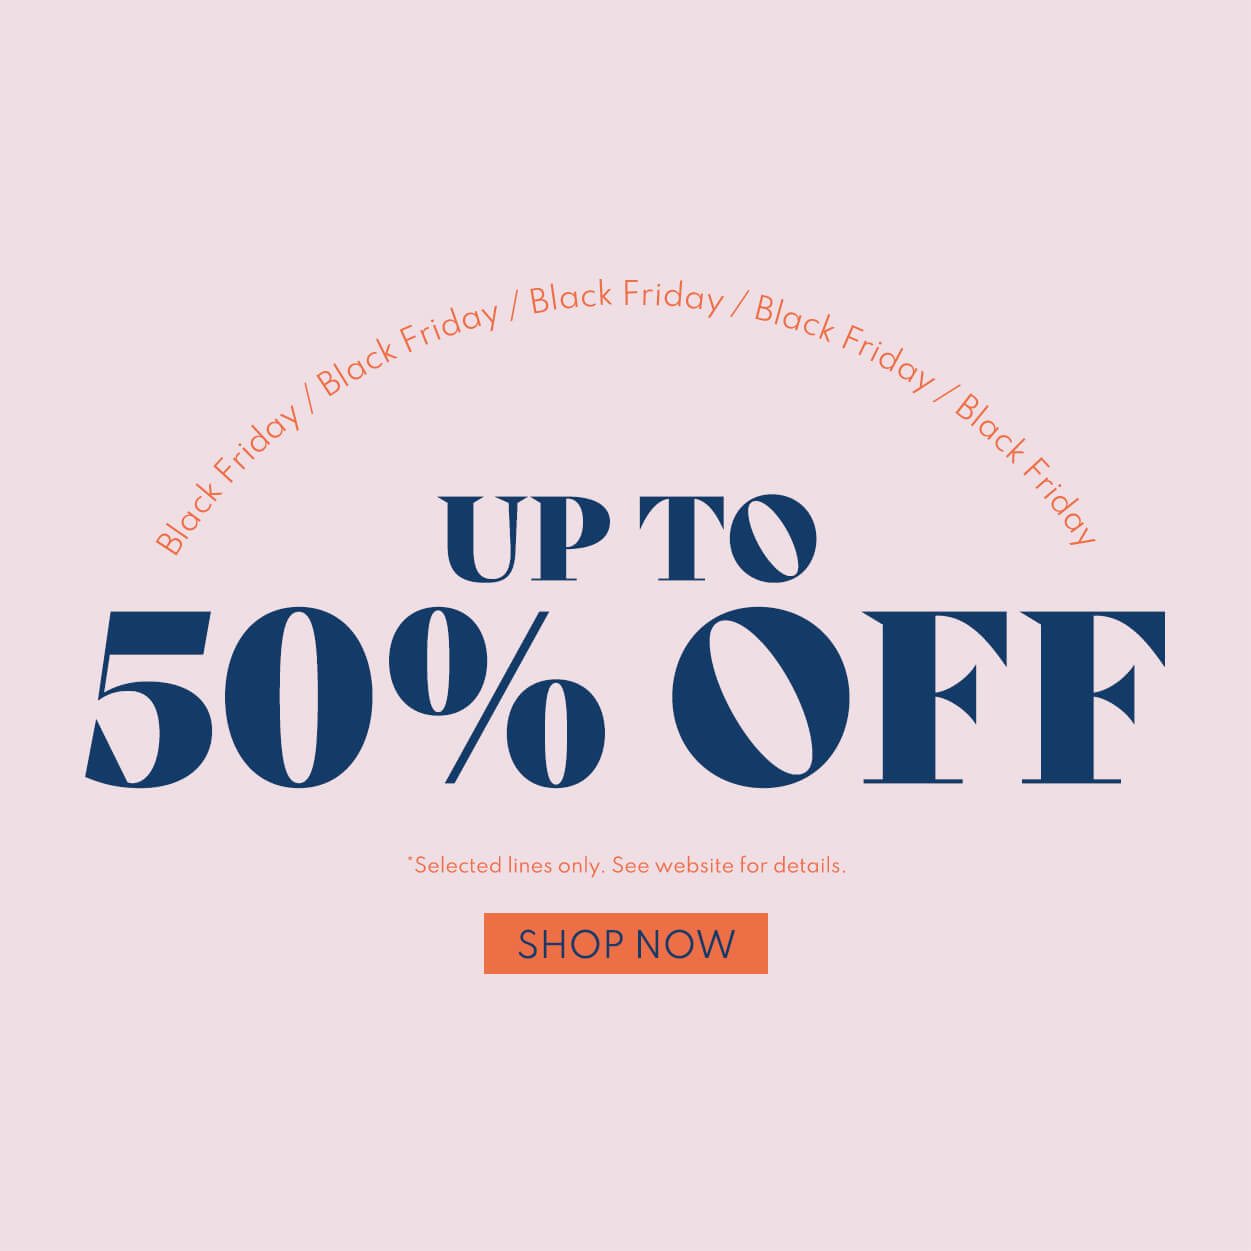 Black Friday - up to 50% off